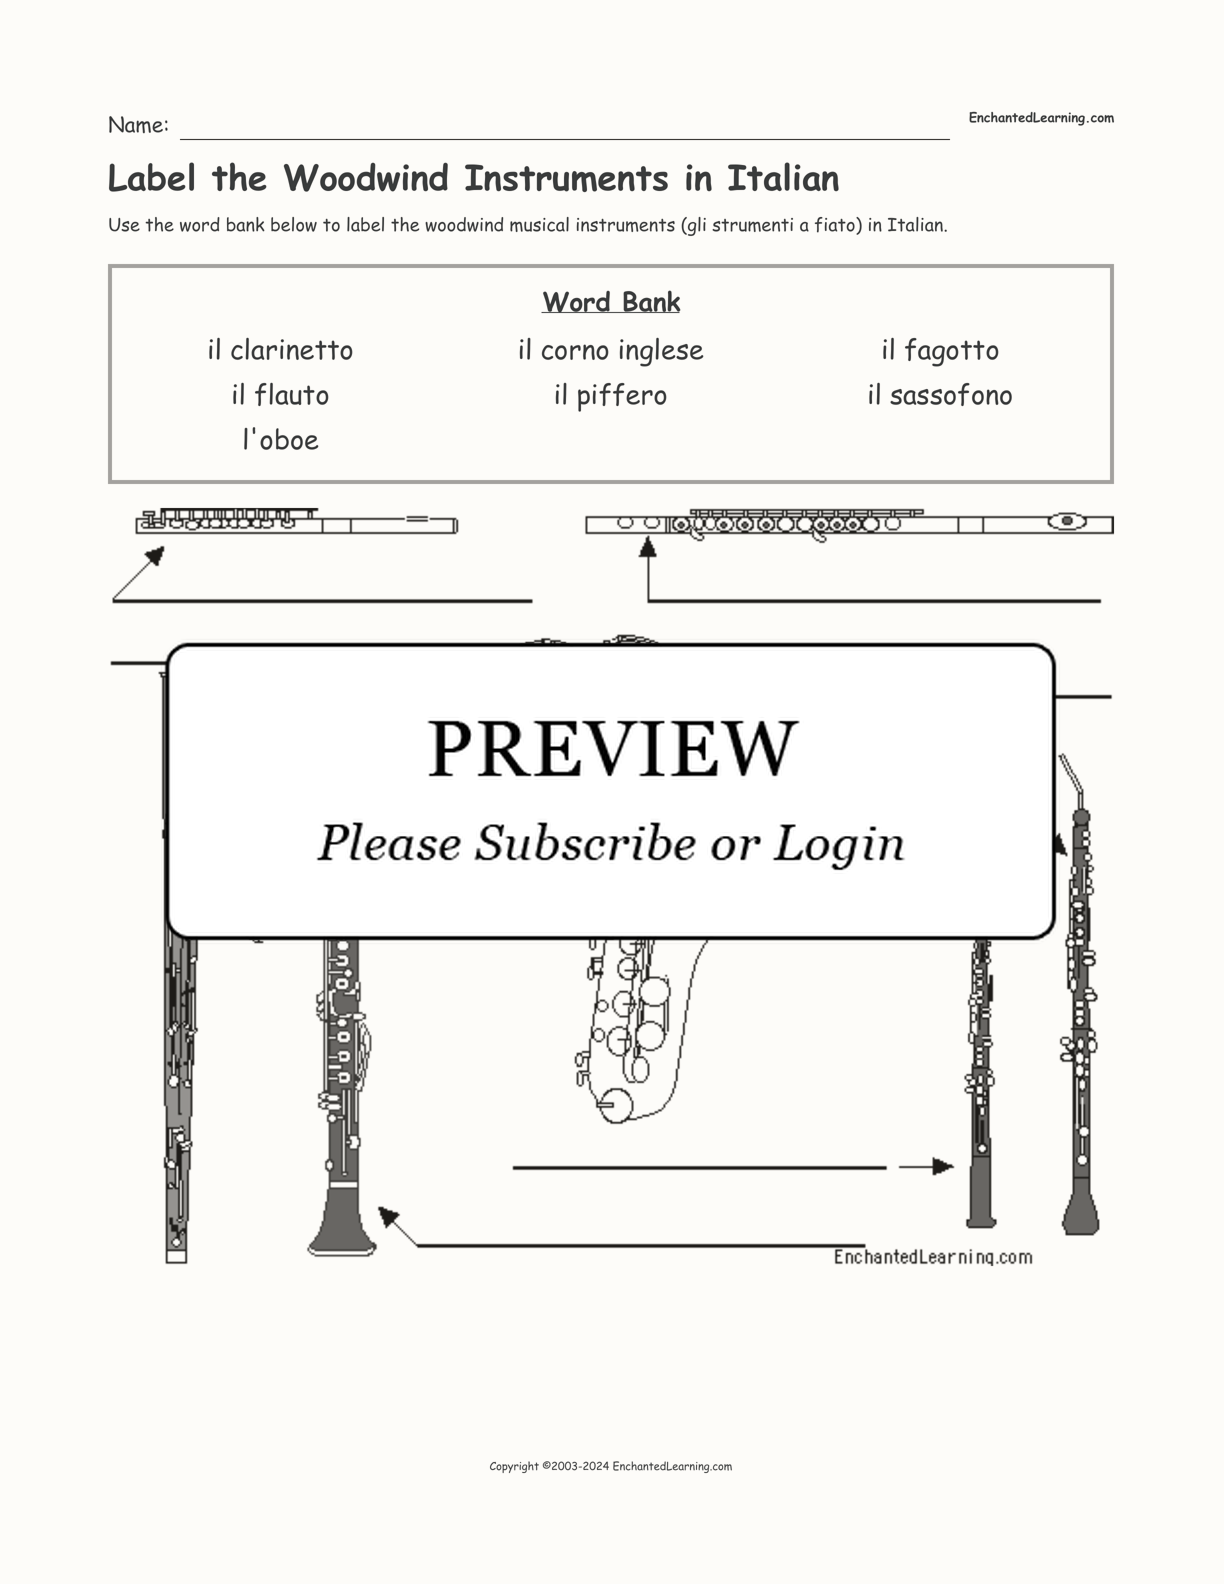 Label the Woodwind Instruments in Italian interactive worksheet page 1